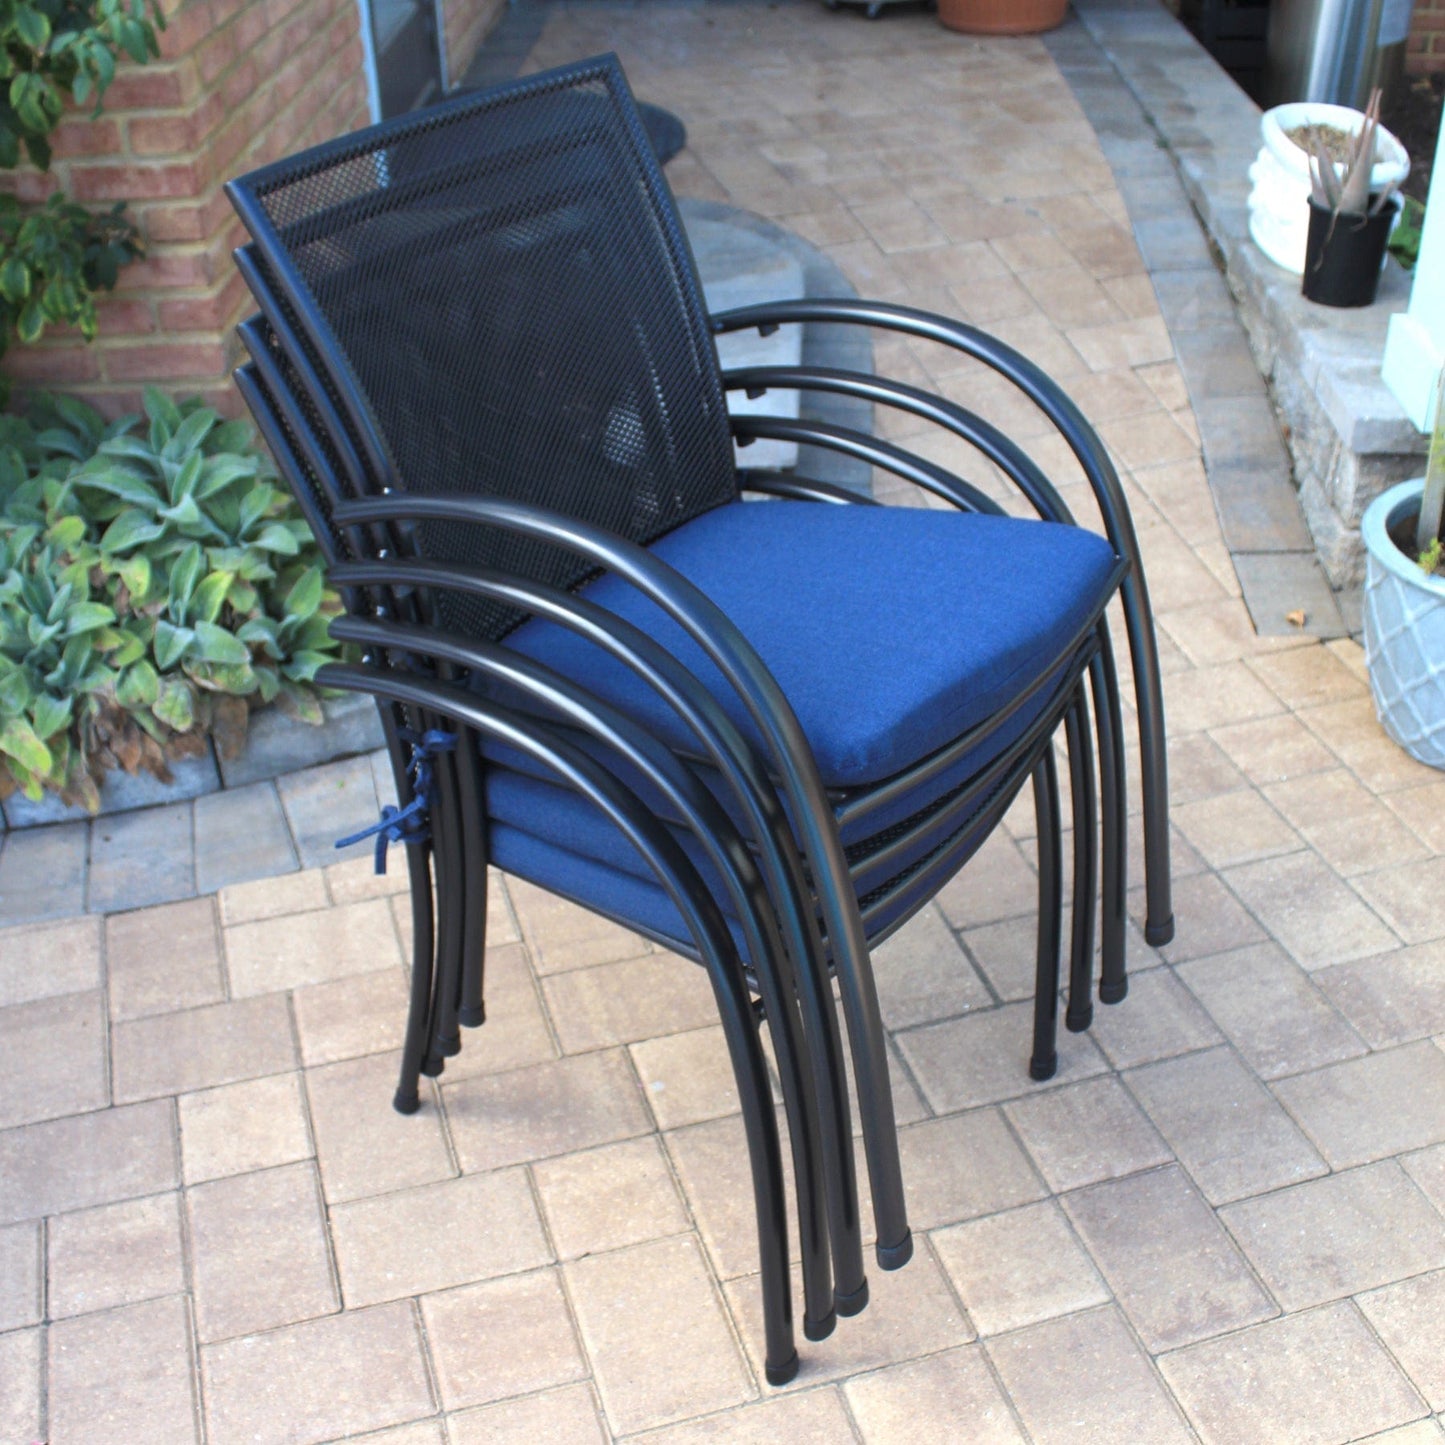 Stackable patio chairs for ease of storage